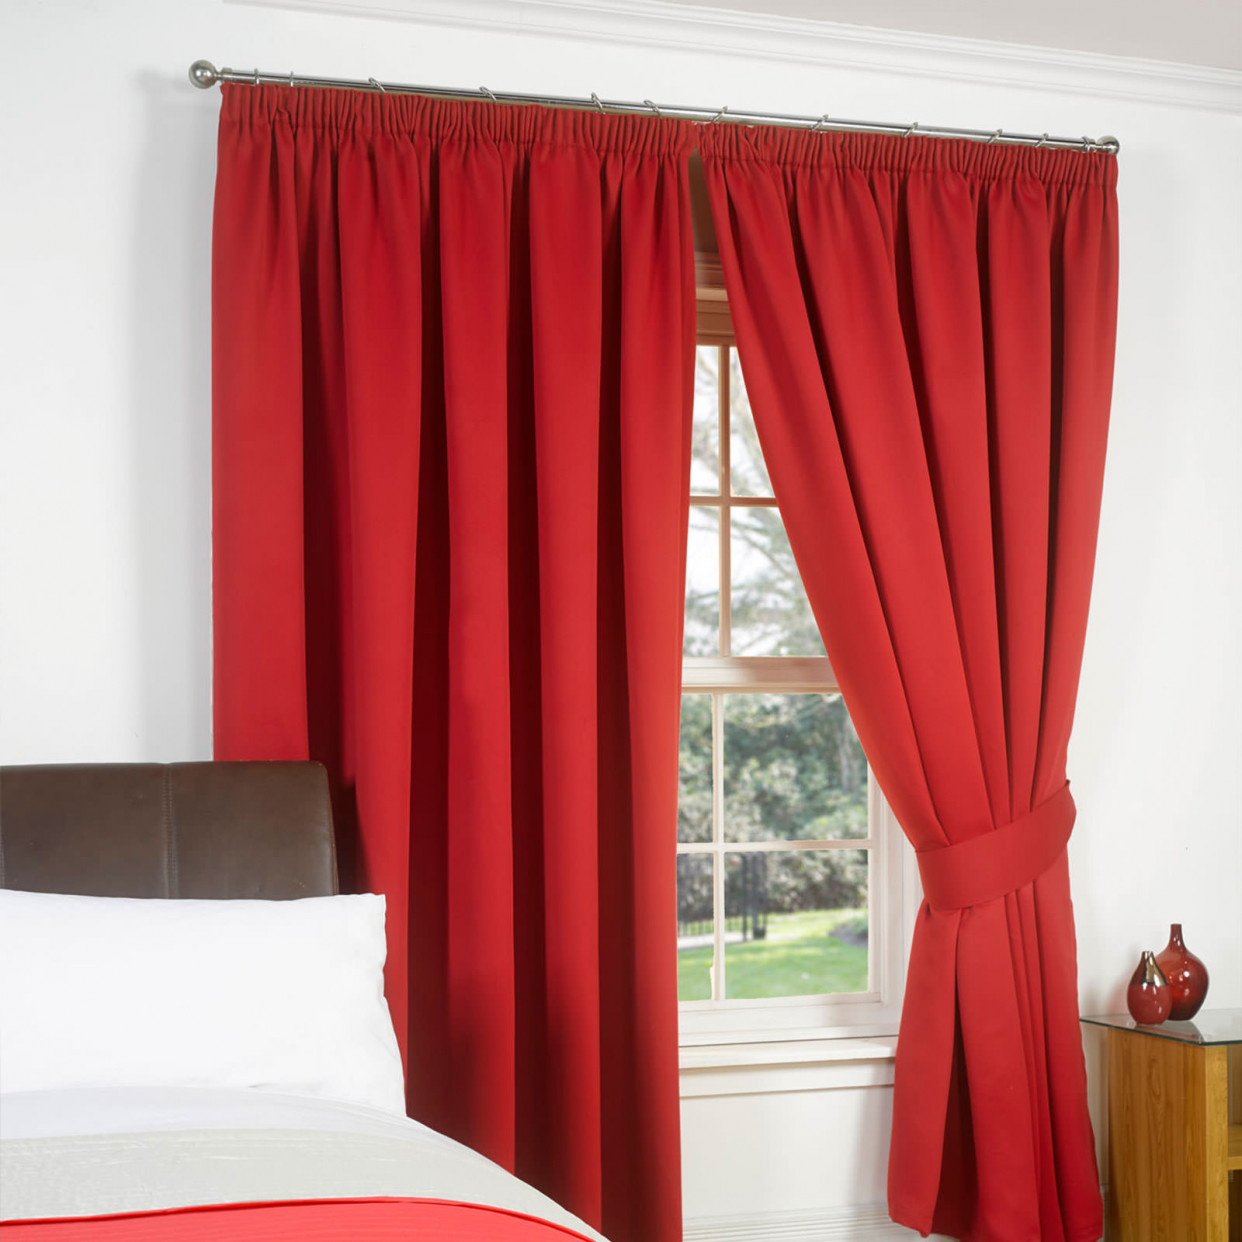 Pencil Pleat Thermal Blackout Curtains - Red 66x72>